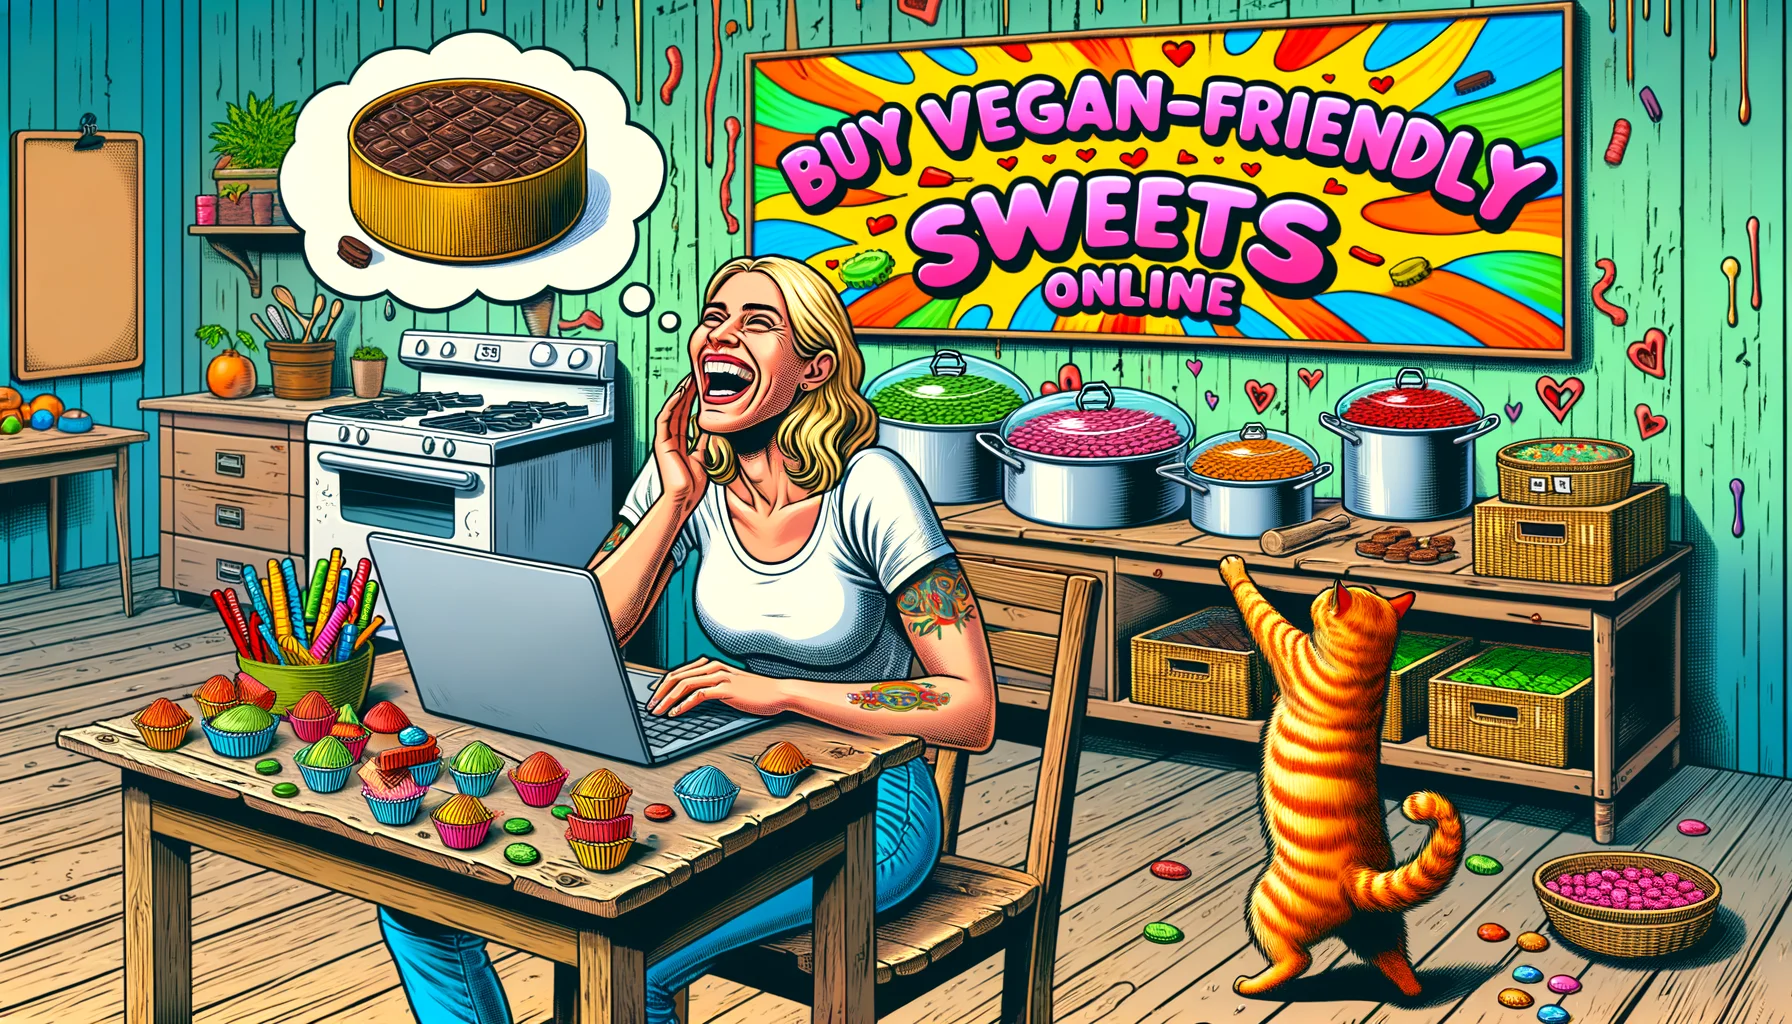 Imagine a comically perfect scene for online vegan-friendly sweets shopping. There's a caucasian woman in her 30s sitting at a rustic wooden desk, laughing heartily with a laptop screen displaying a colorful vegan sweets online store. Stacks of vegan-friendly sweets with readable 'Vegan-Friendly' labels are visible surrounding her. In the background, there's a kitchen filled with pots of delicious vegan sweets being prepared. An orange cat is trying to reach the sweets with a jovial expression. The phrase 'Buy Vegan-Friendly Sweets Online' is prominently displayed in vibrant graffiti-style letters.